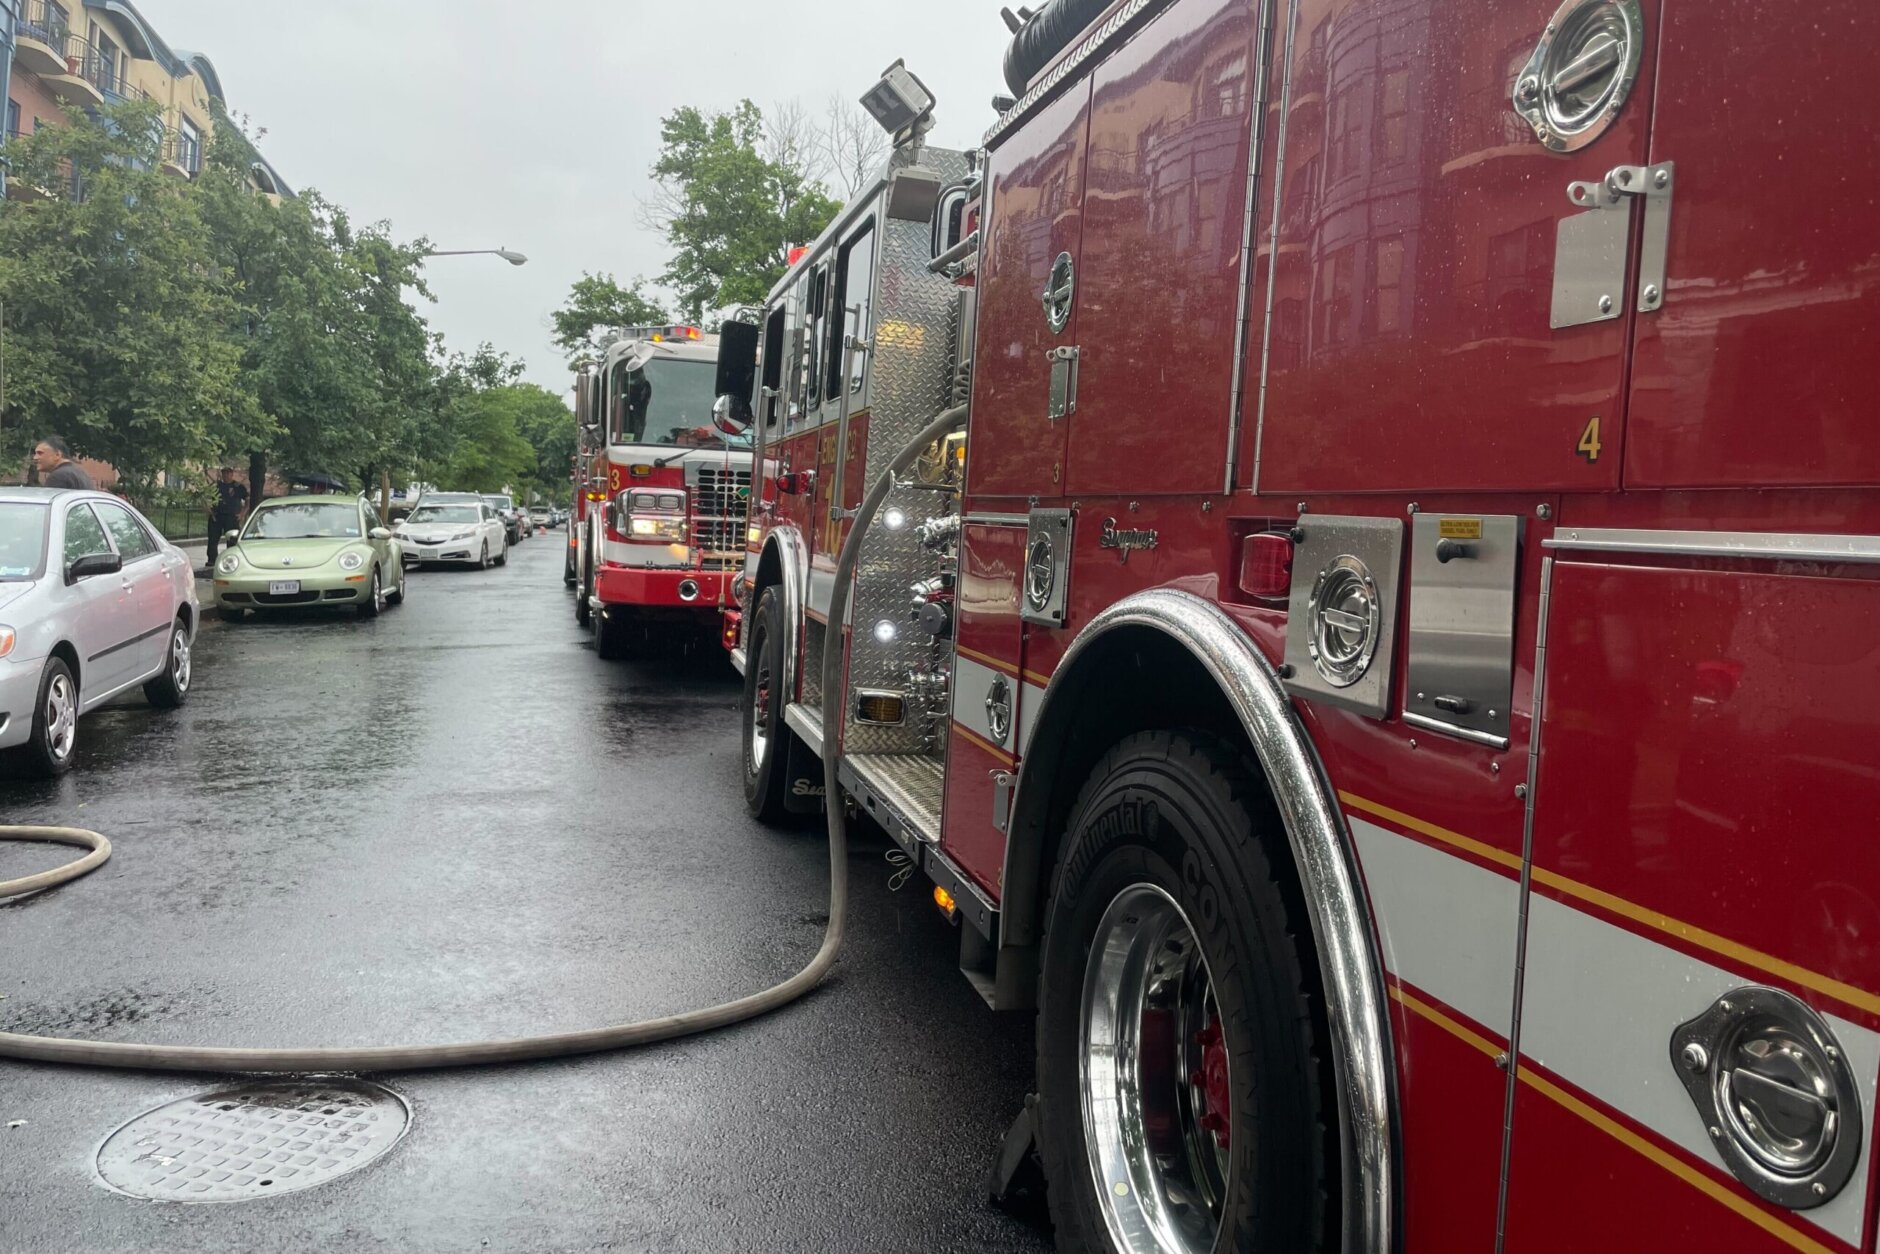 First day of three filming for DC Firefighters who will debut in a national training video this Fall. The department calls it an honor to help firefighters across the country learn how to knock down rowhouse fires.